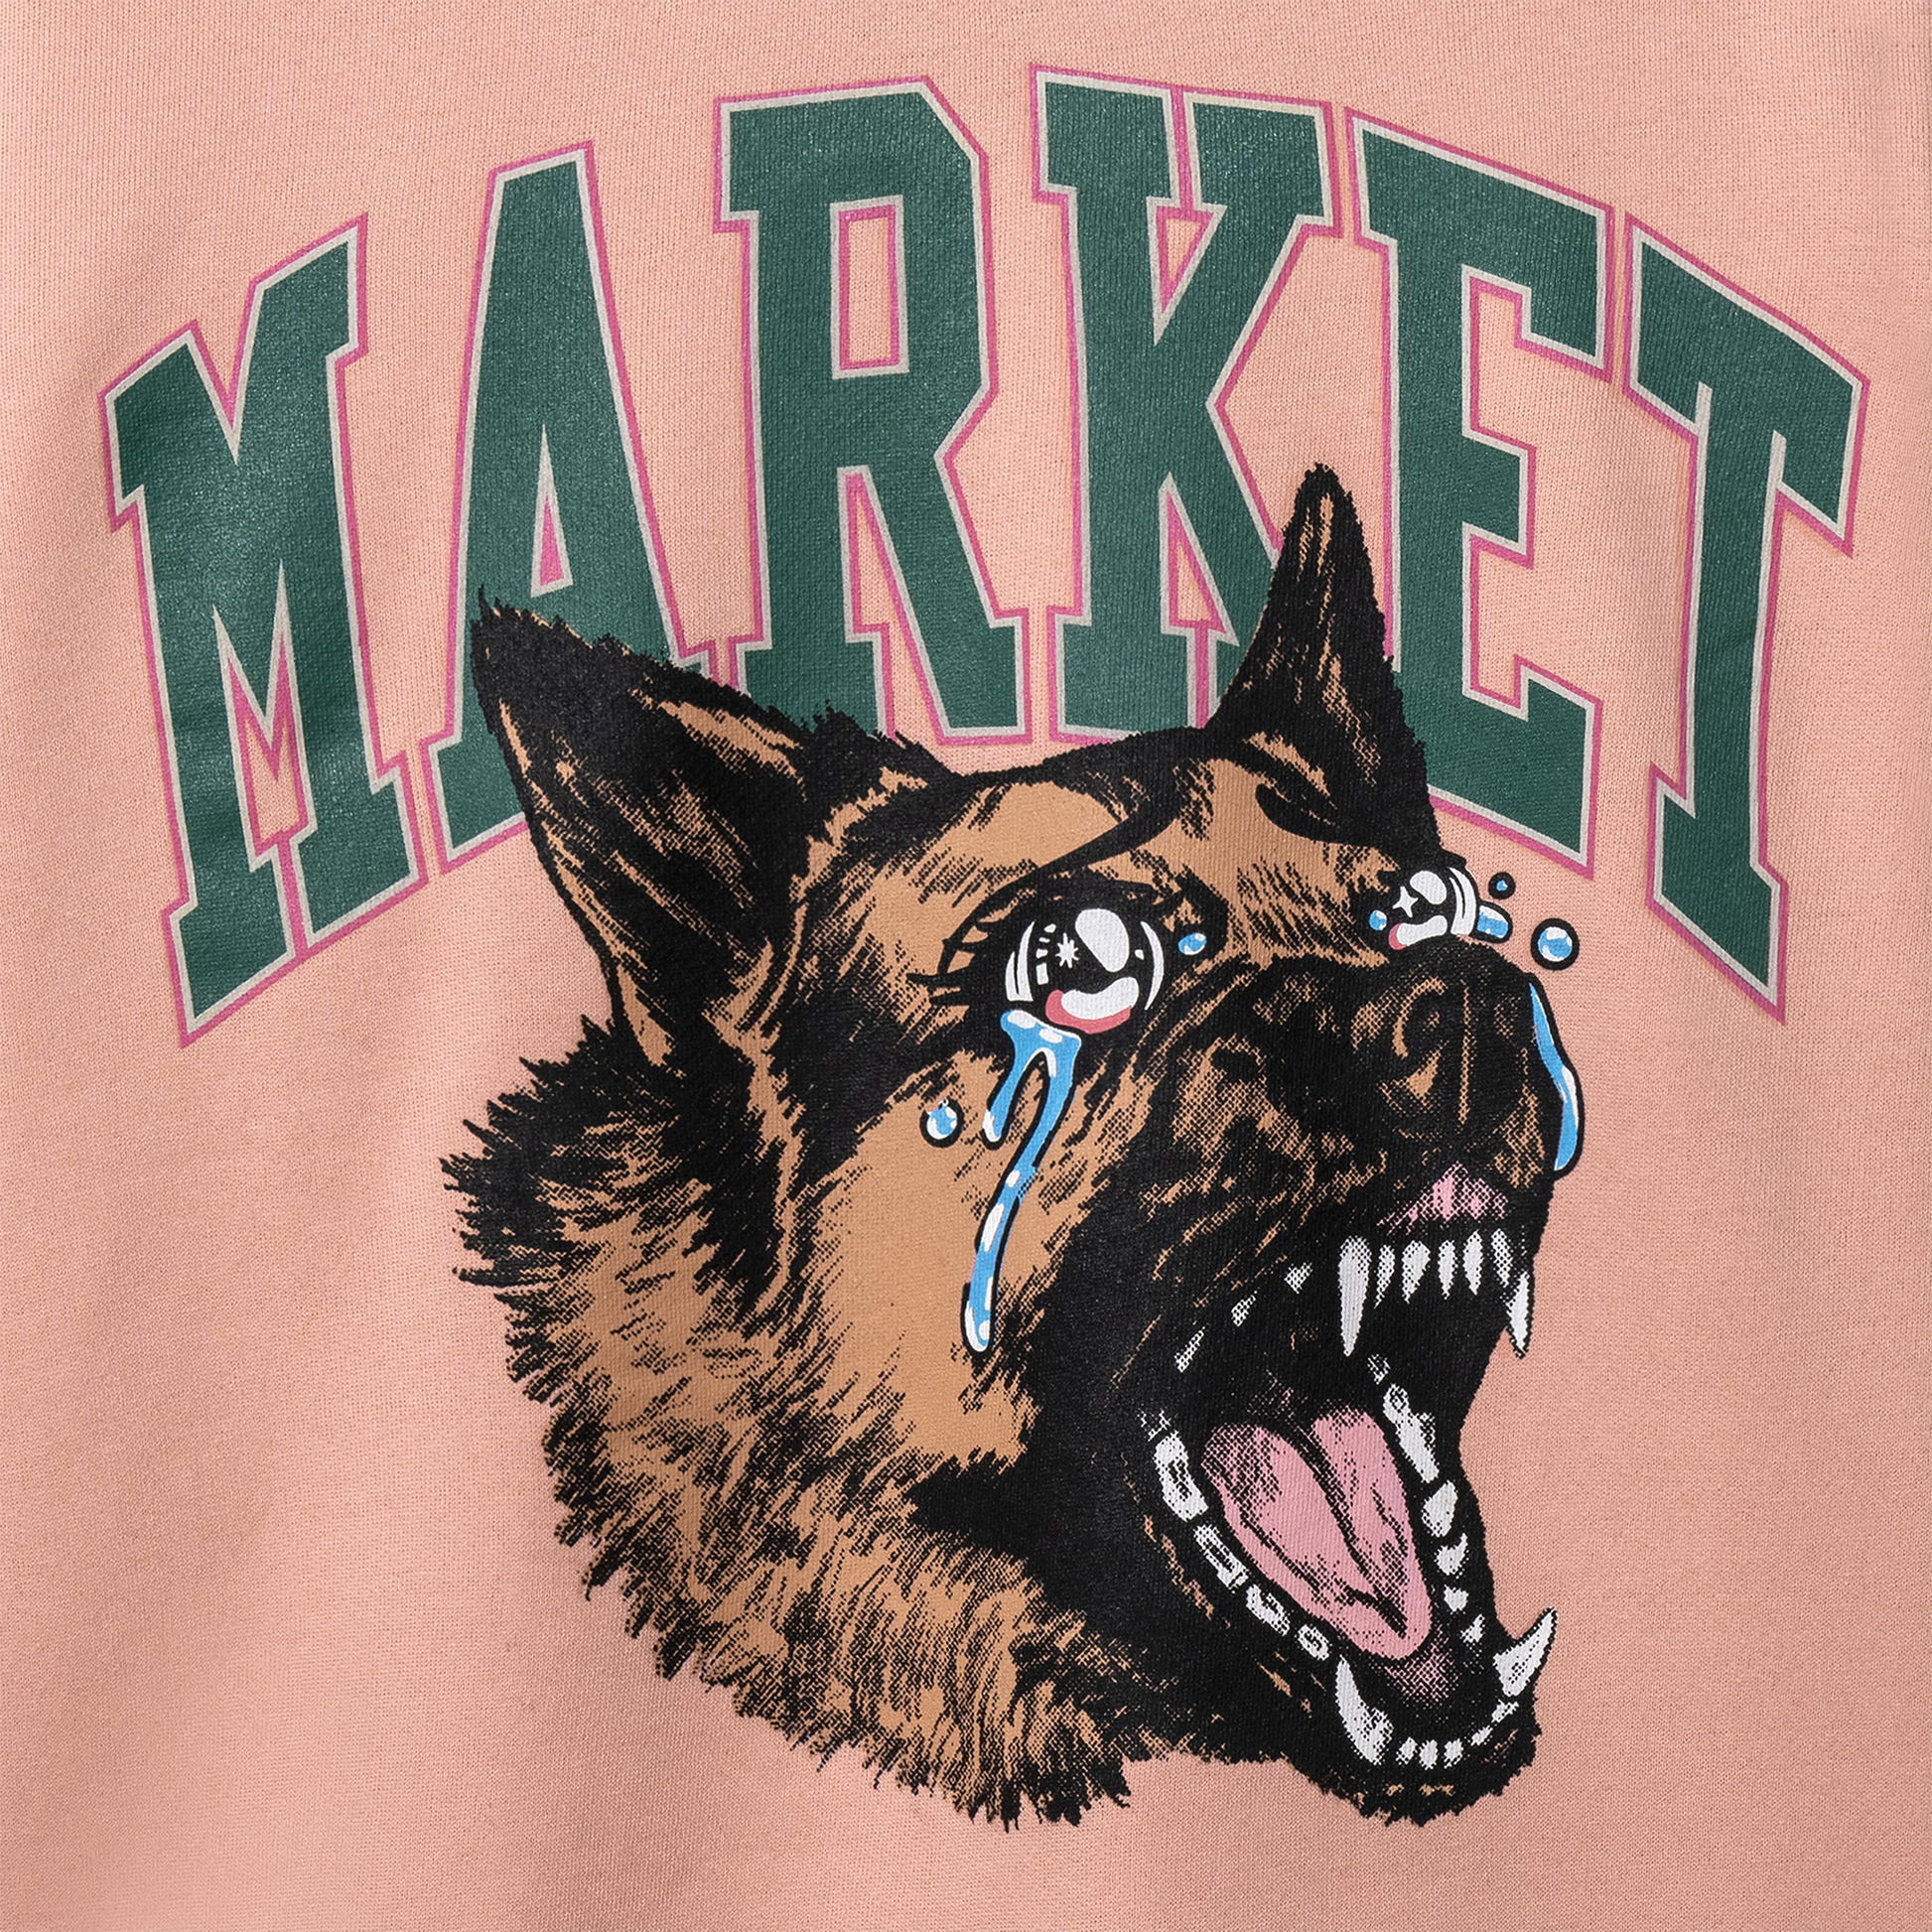 MARKET clothing brand BEWARE CRYING CREWNECK SWEATSHIRT. Find more graphic tees and hoodies at MarketStudios.com. Formally Chinatown Market.